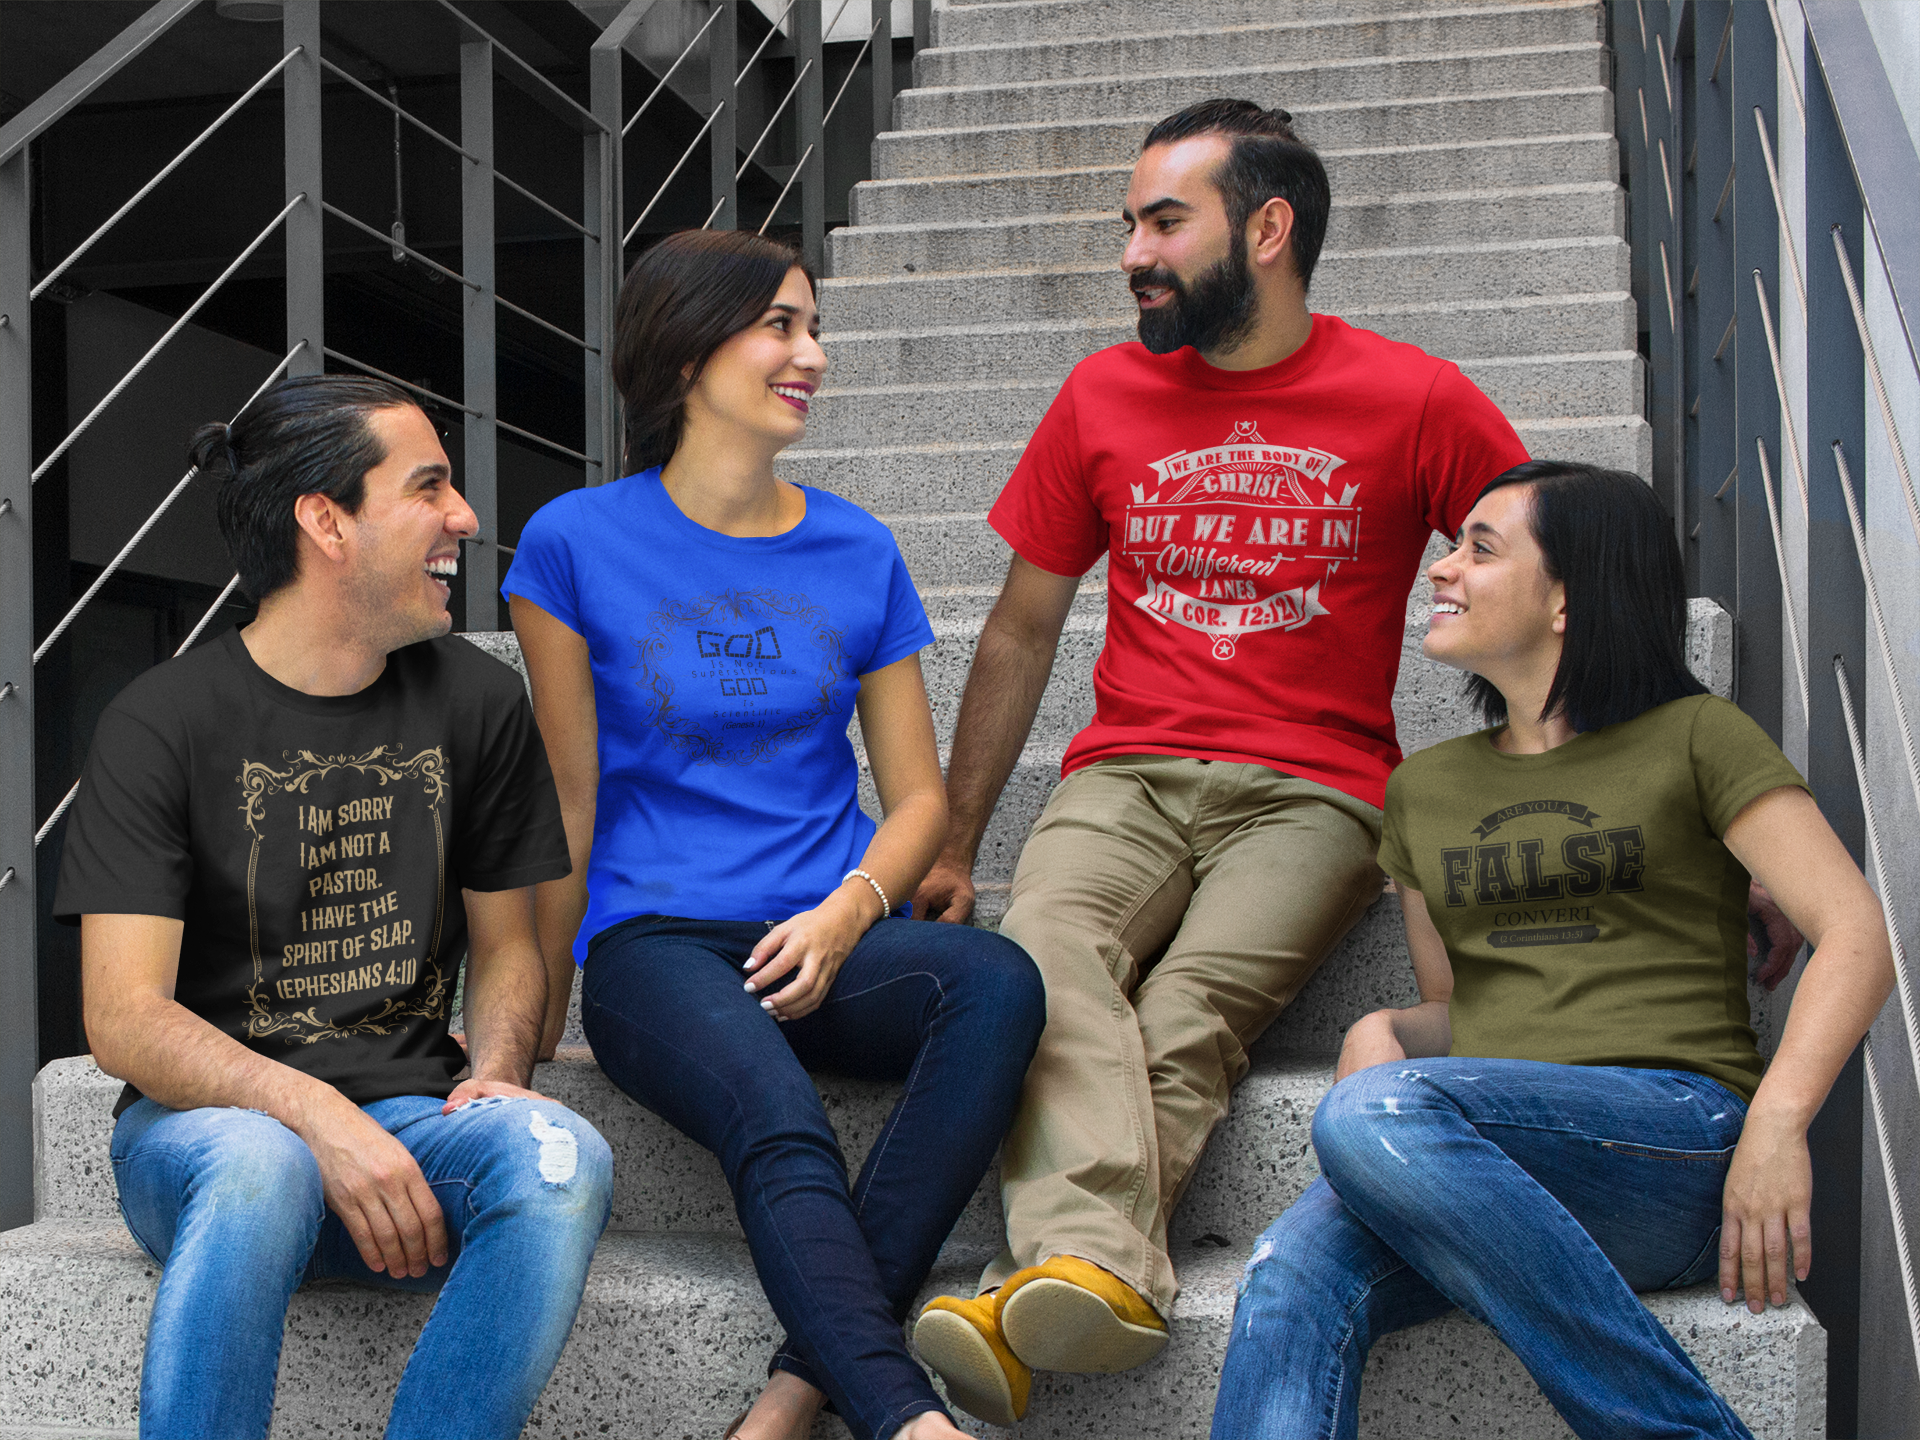 group-of-four-friends-chatting-while-sitting-down-in-a-concrete-stairway-and-wearing-different-t-shirts-mockup-a15632_086d1e34-0189-40e6-a763-288b20890d9d.png